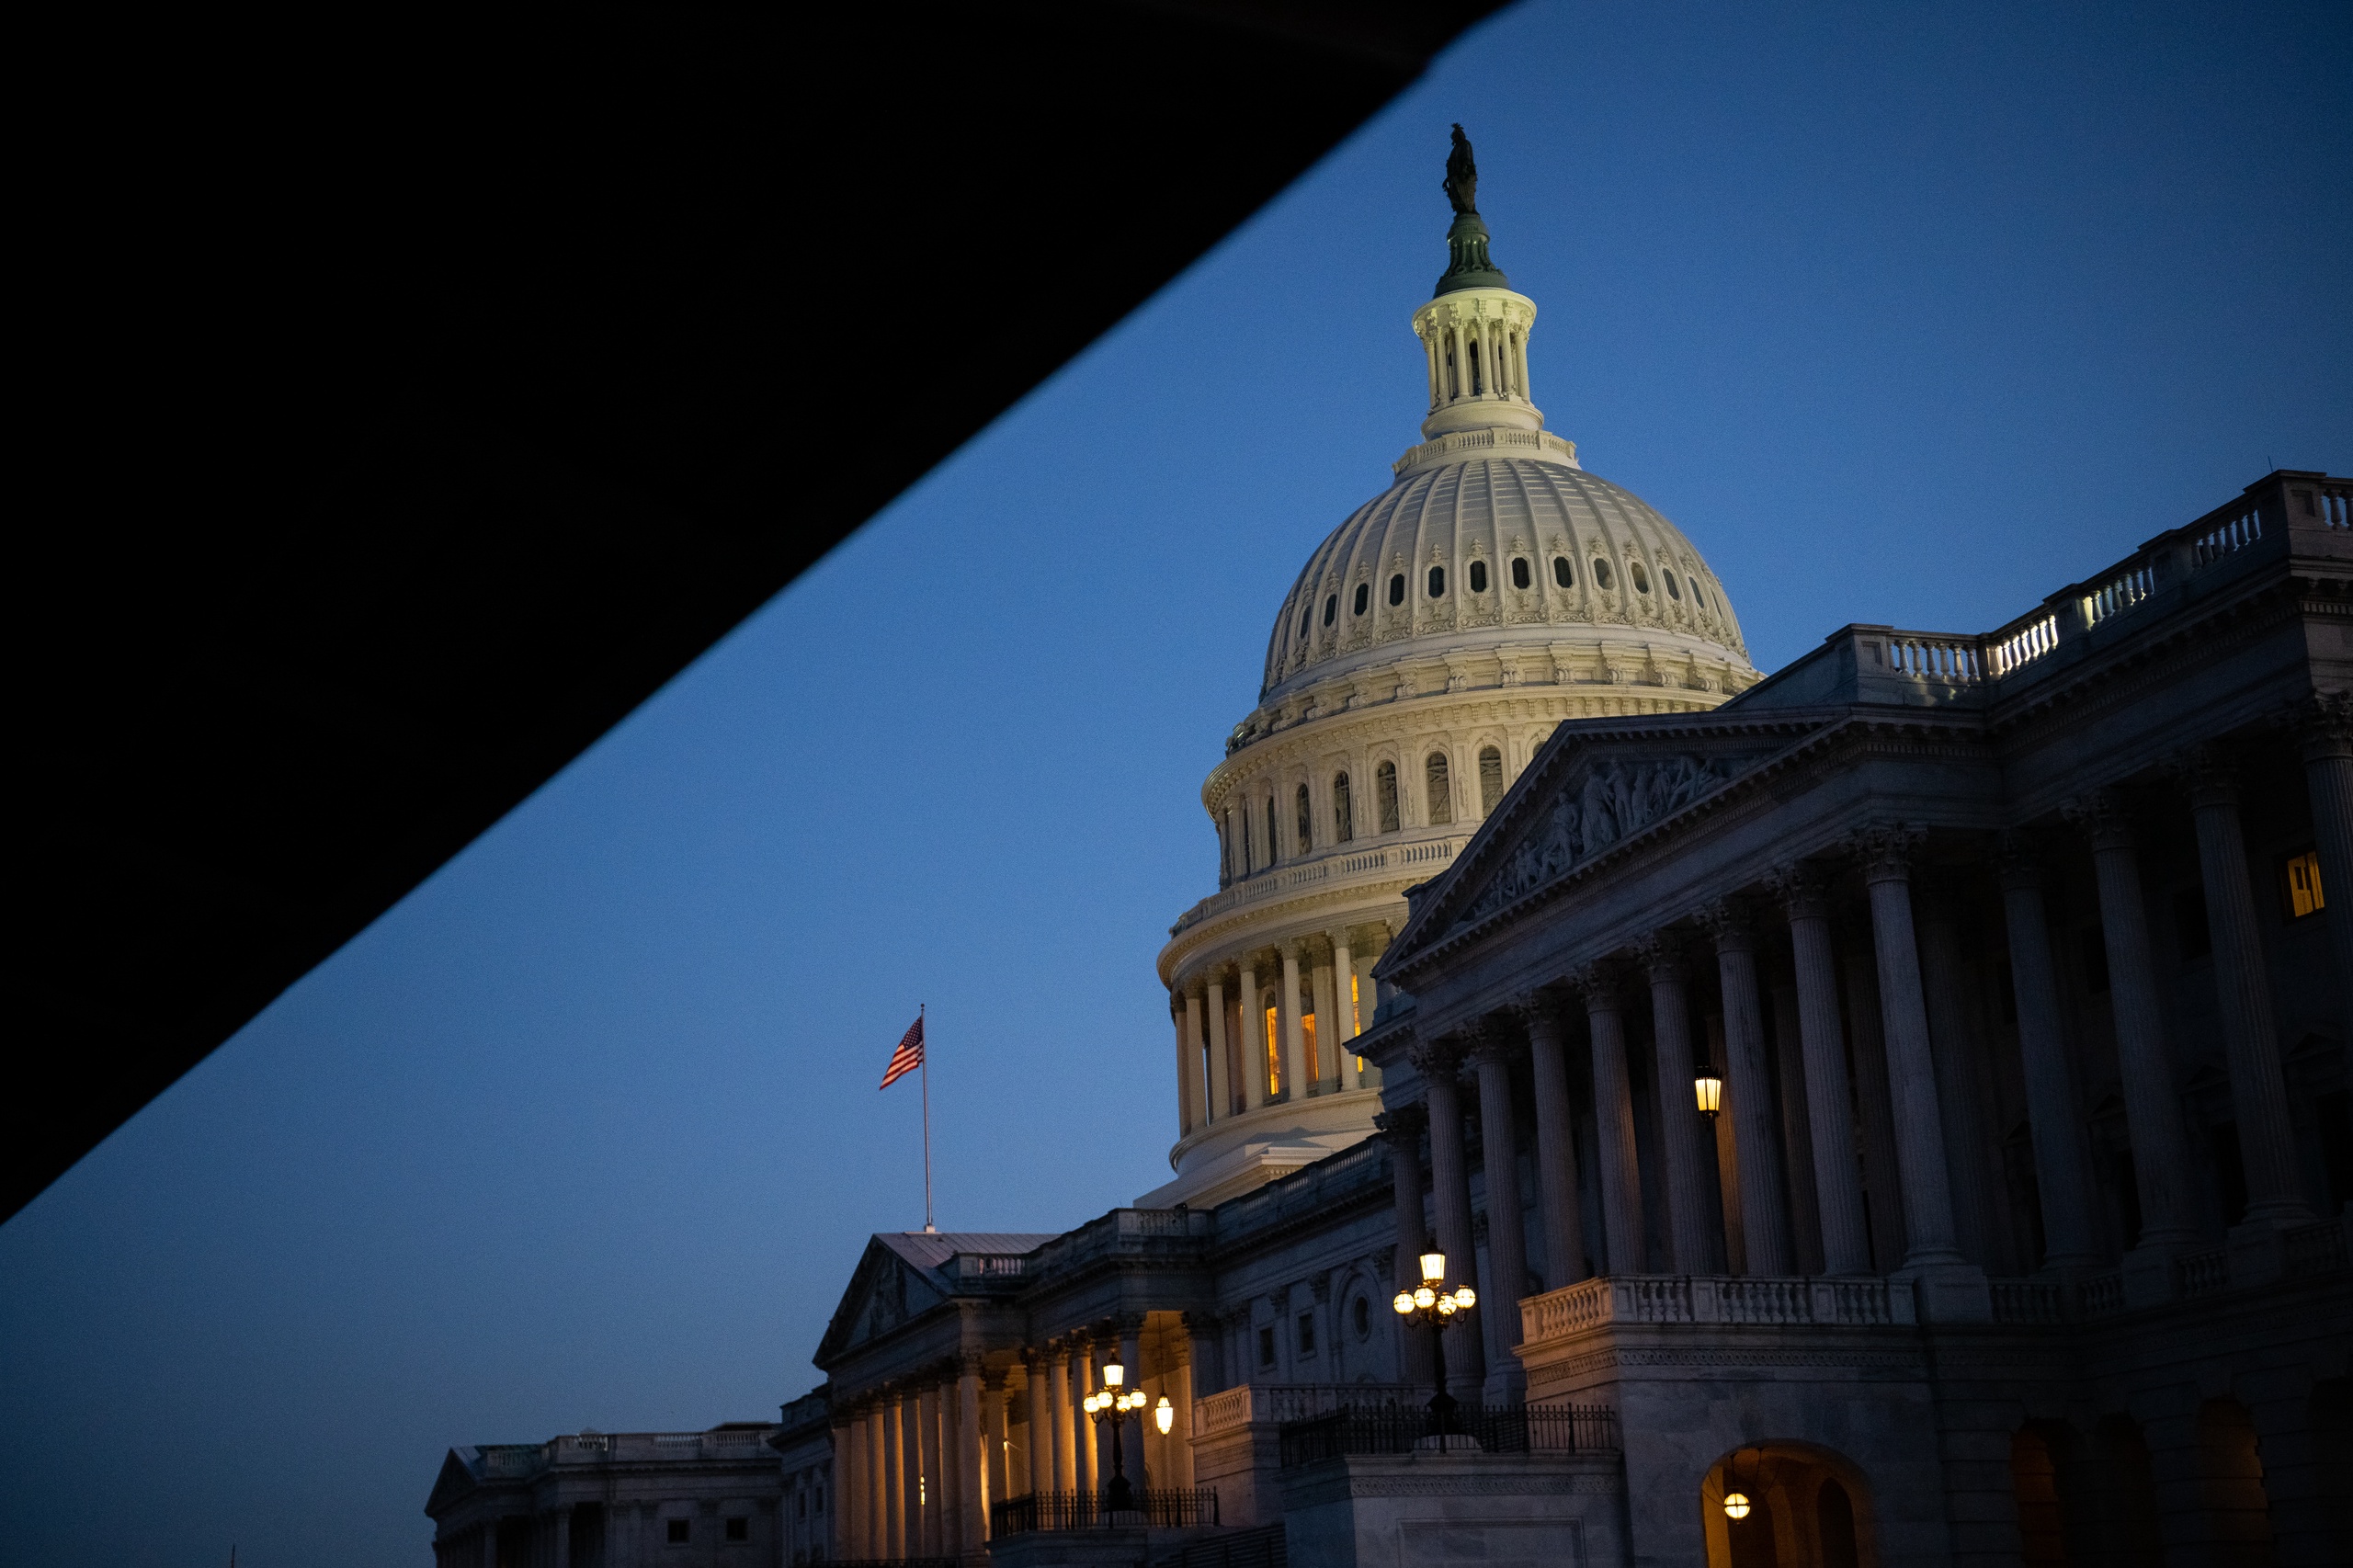 A general view of the U.S. Capitol Building, in Washington, D.C., on Friday, August 12, 2022. (Graeme Sloan/Sipa USA)